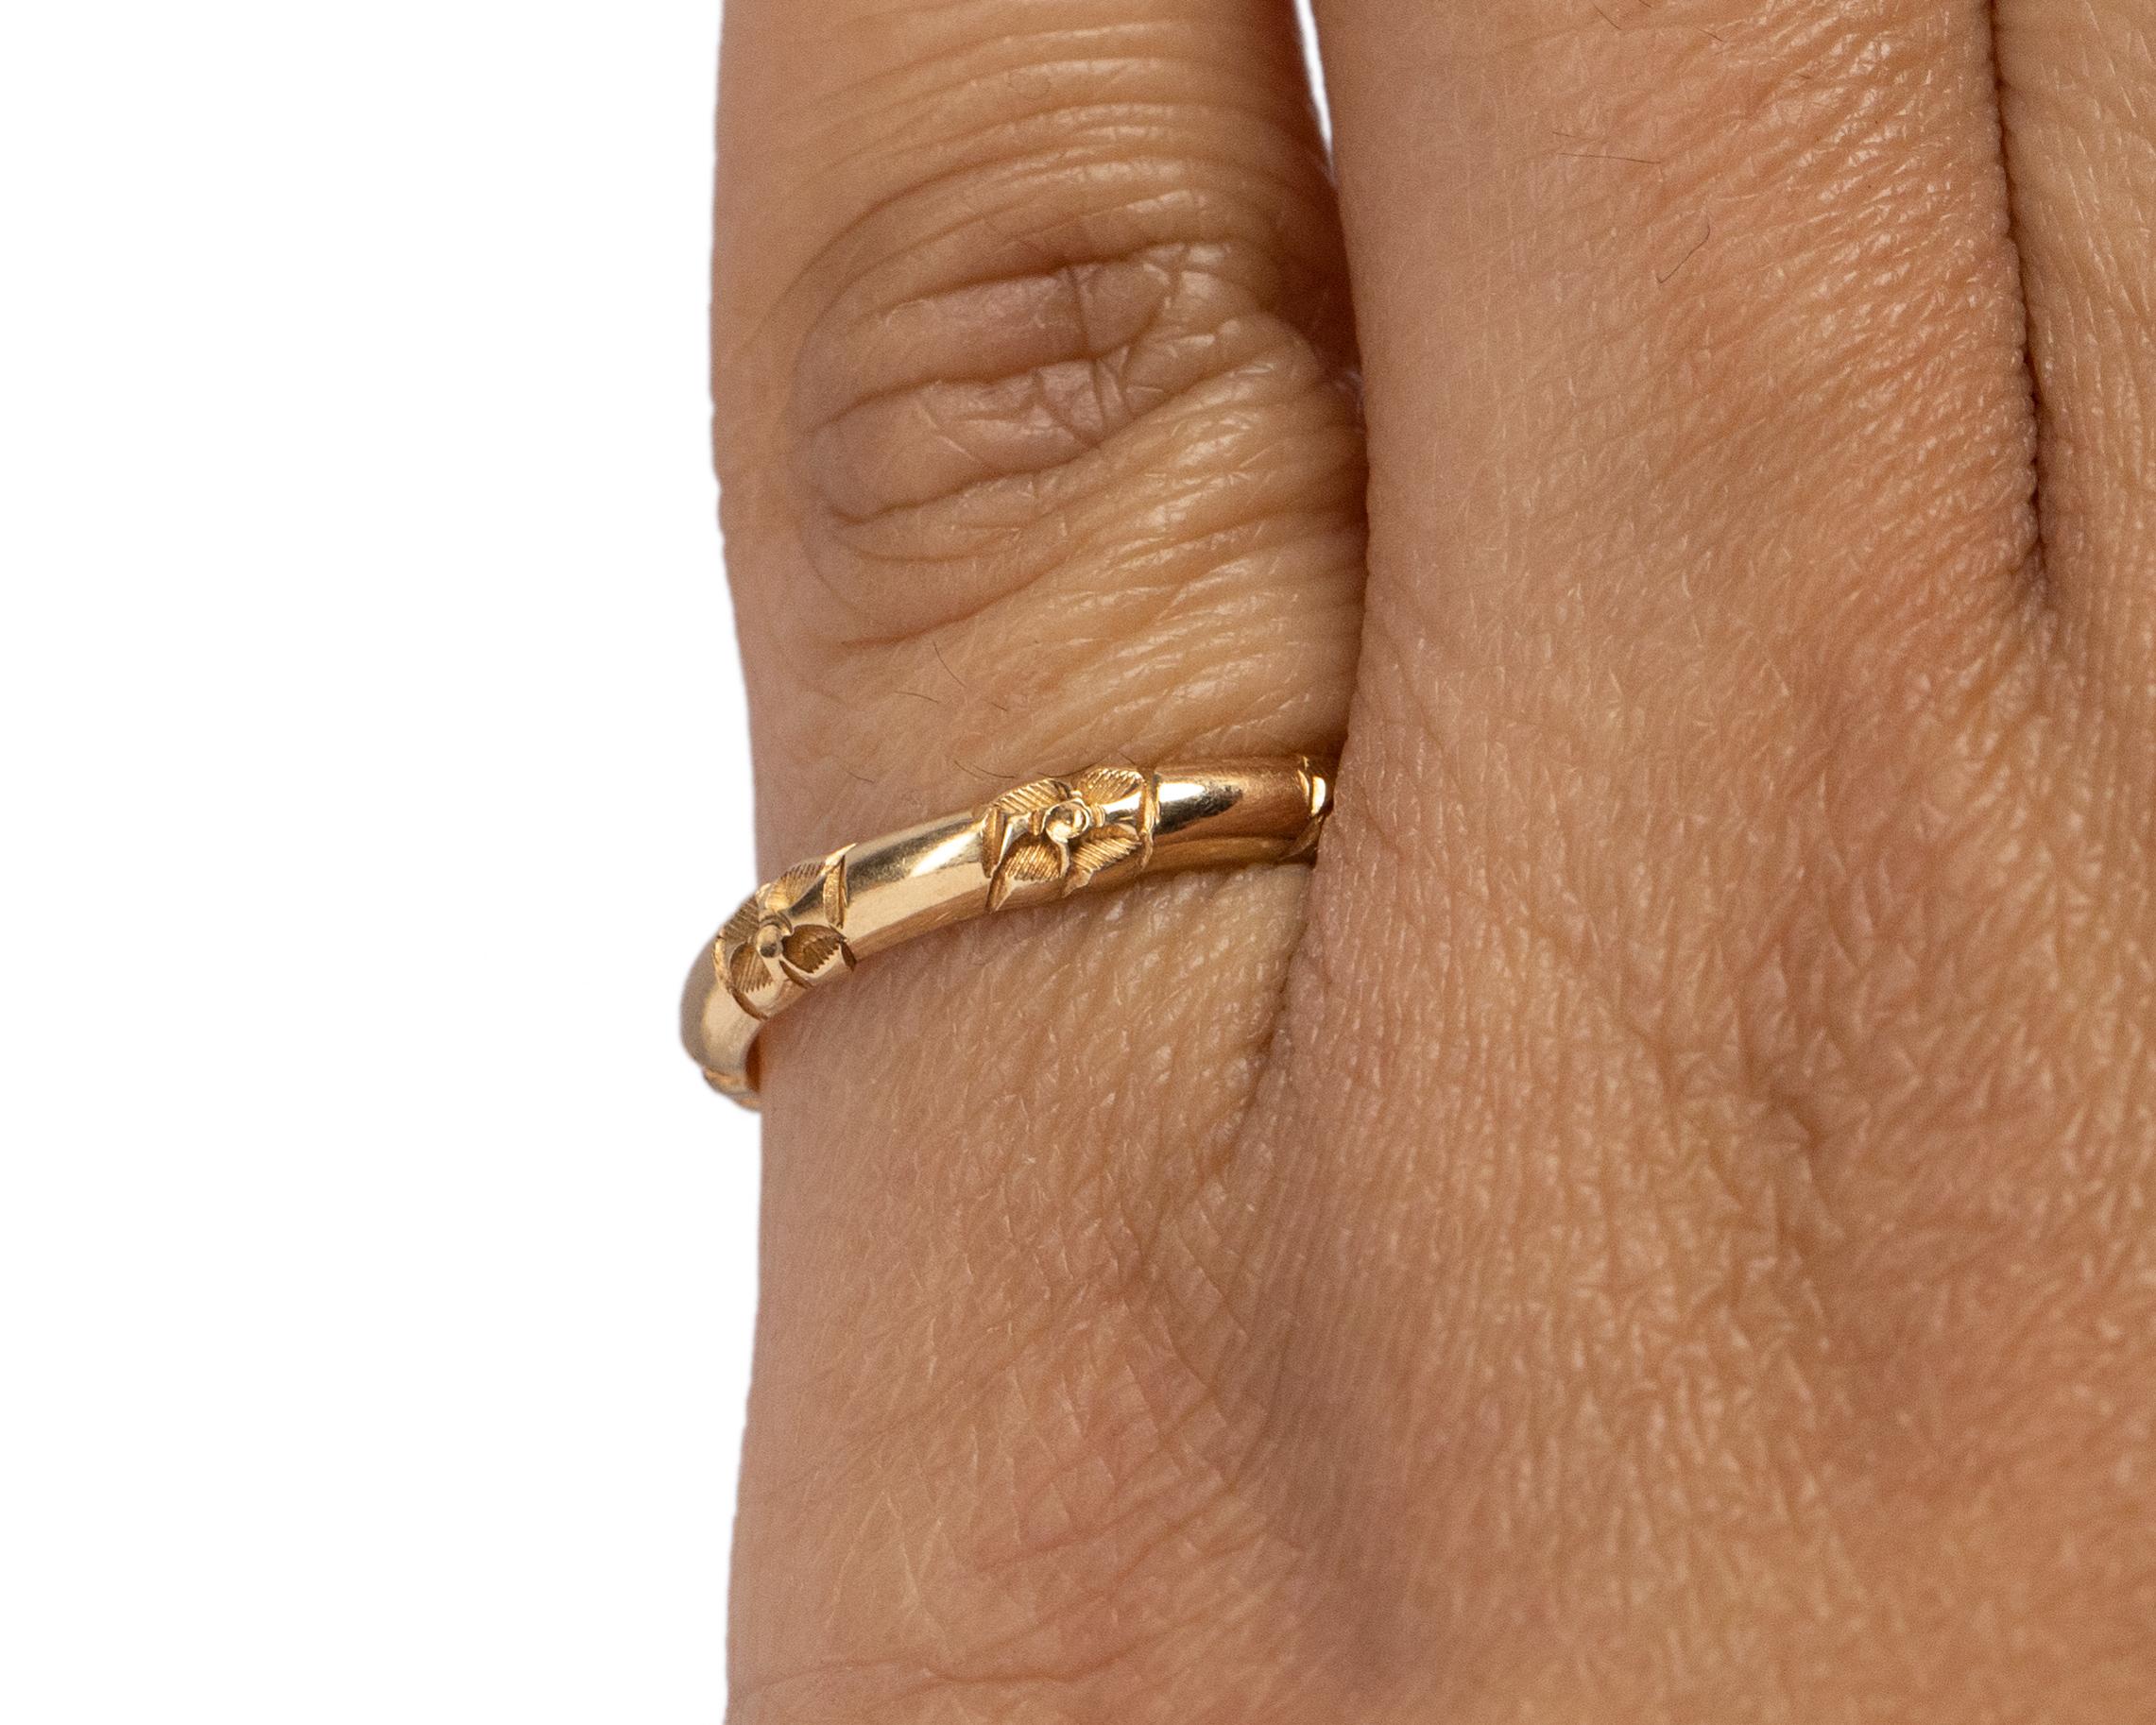 Item Details: 
Ring Size: 4.75
Metal Type: 14 karat yellow gold [Hallmarked, and Tested]
Weight: 1.8 grams

Finger to Top of Stone Measurement: 1.5mm
Condition: Excellent